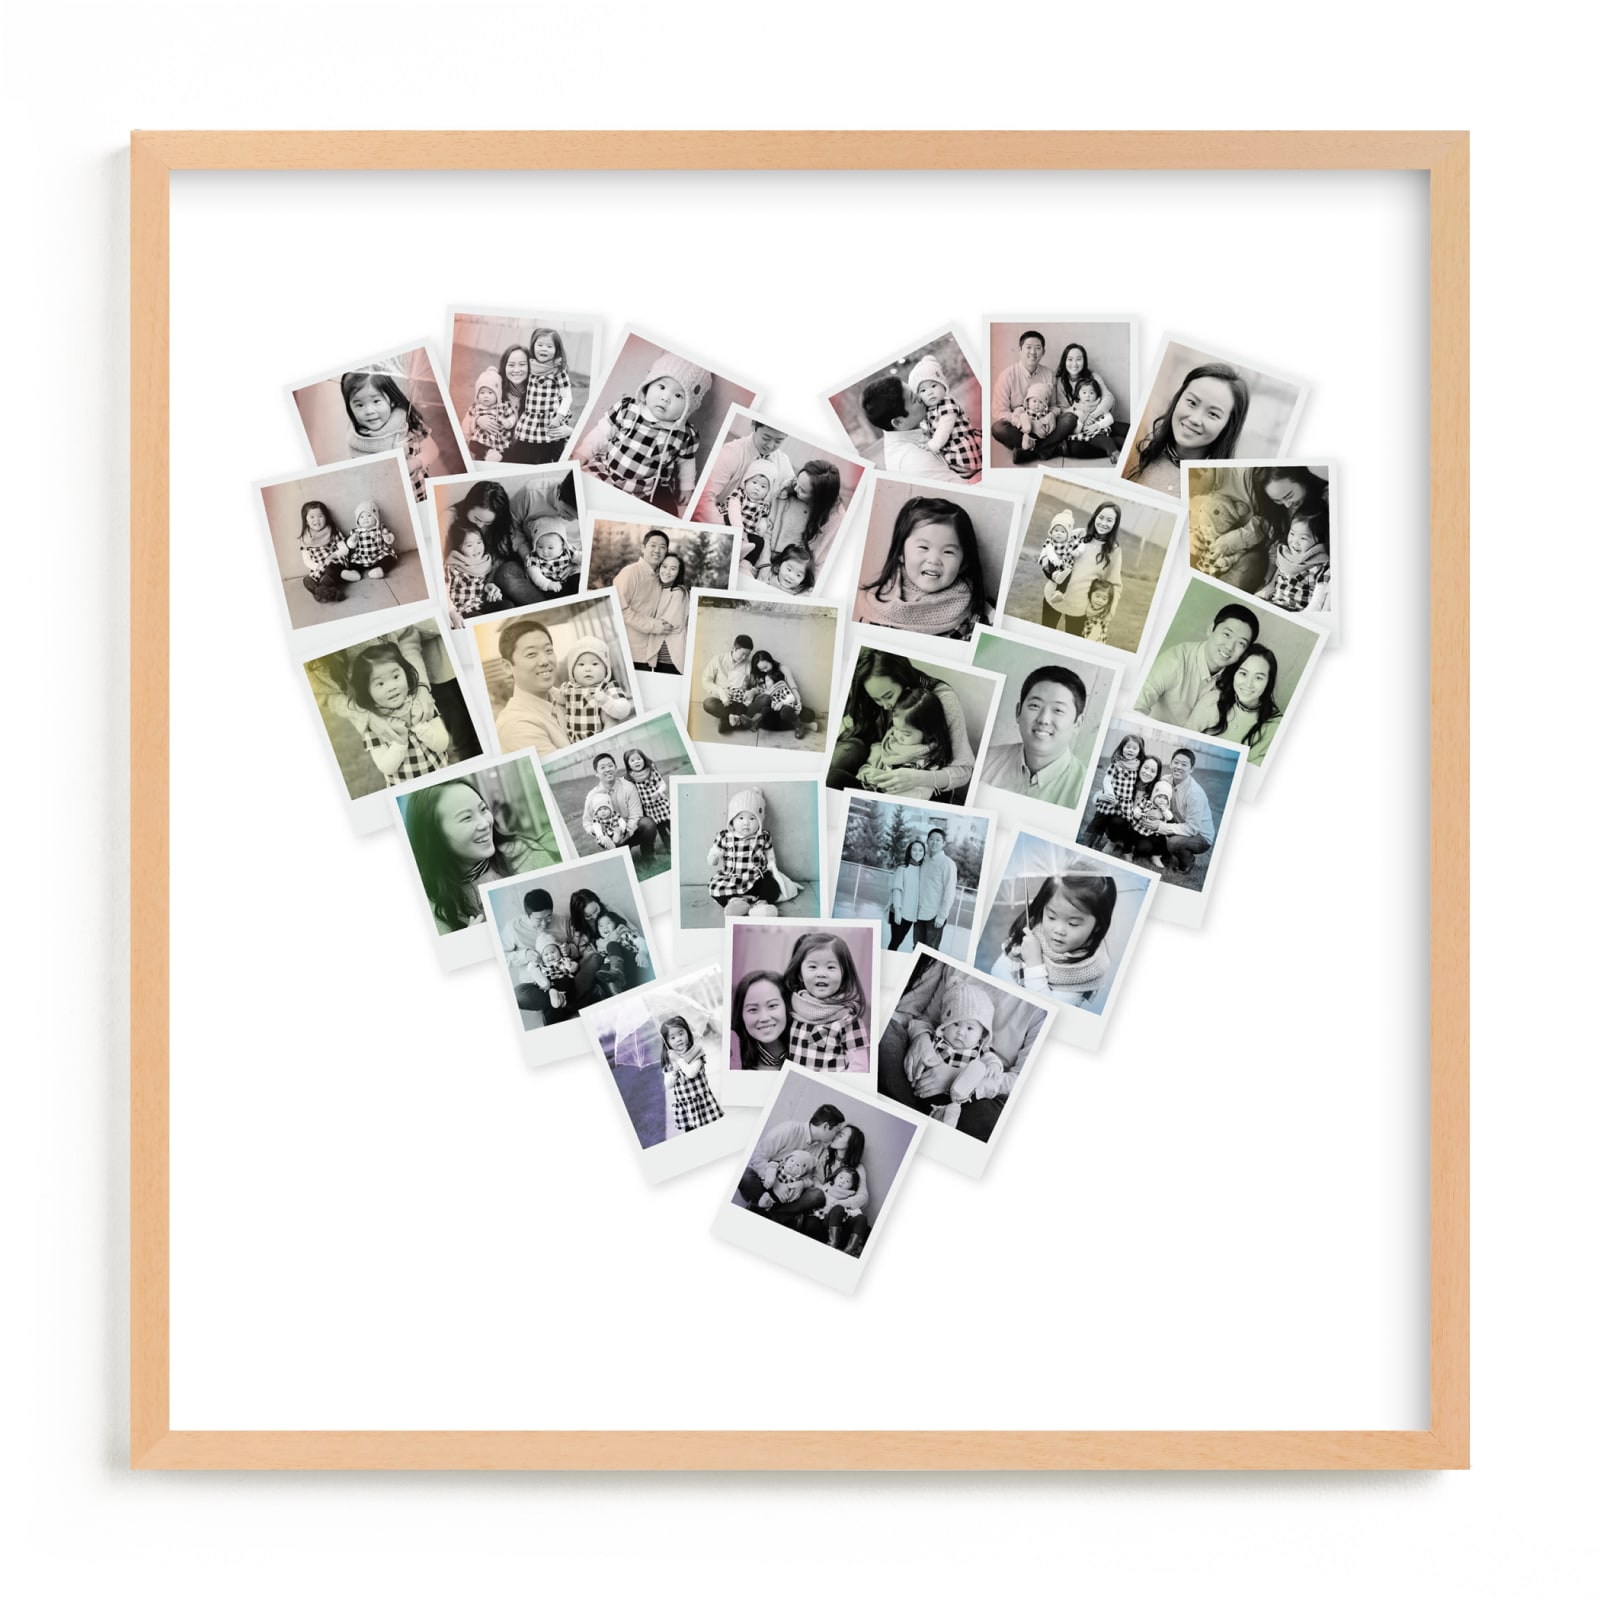 This is a colorful photo art by Minted called Filter Heart Snapshot Mix® Photo Art.